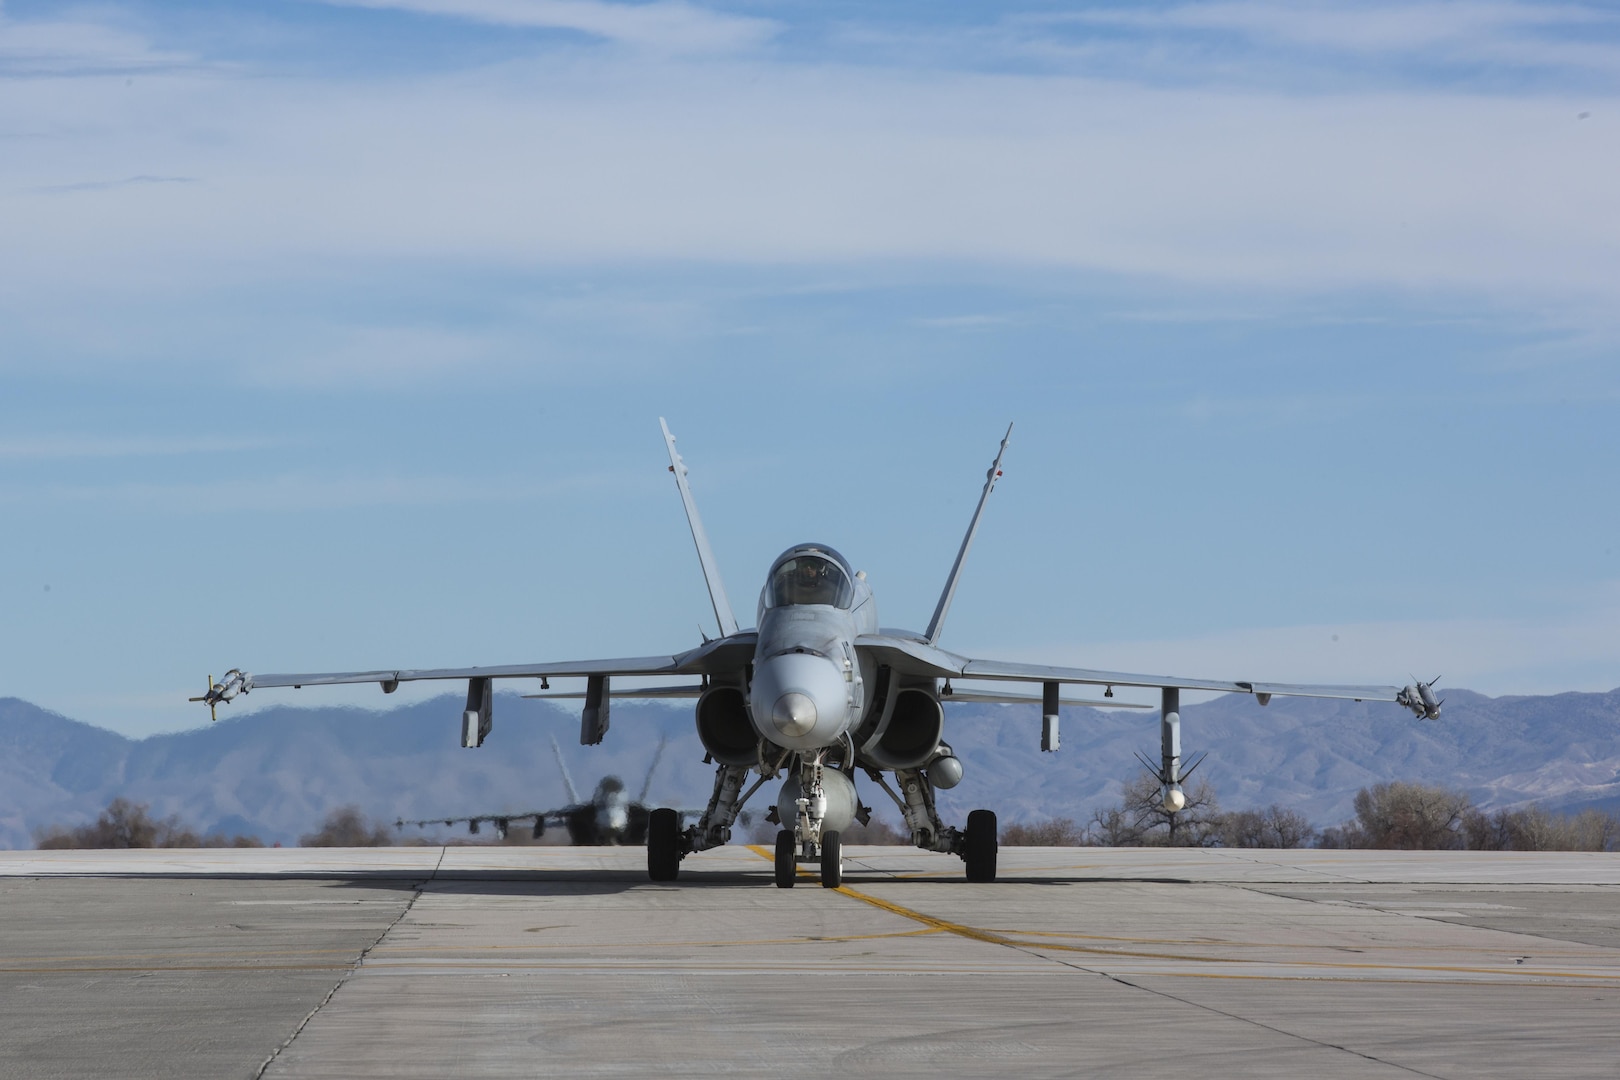 Two F/A-18C Hornets with Marine Fighter Attack Squadron (VMFA) 323 “Death Rattlers” approach the squadron’s designated area of the flight line at Naval Air Station Fallon, Nev., Feb. 15. The Death Rattlers, one of two Marine Hornet squadrons to deploy aboard Navy aircraft carriers, trained at NAS Fallon to strengthen tactical air integration, fulfill predeployment requirements and build rapport with the Navy squadrons they will deploy with in summer 2017. (U.S. Marine Corps photo by Sgt. Lillian Stephens/Released)